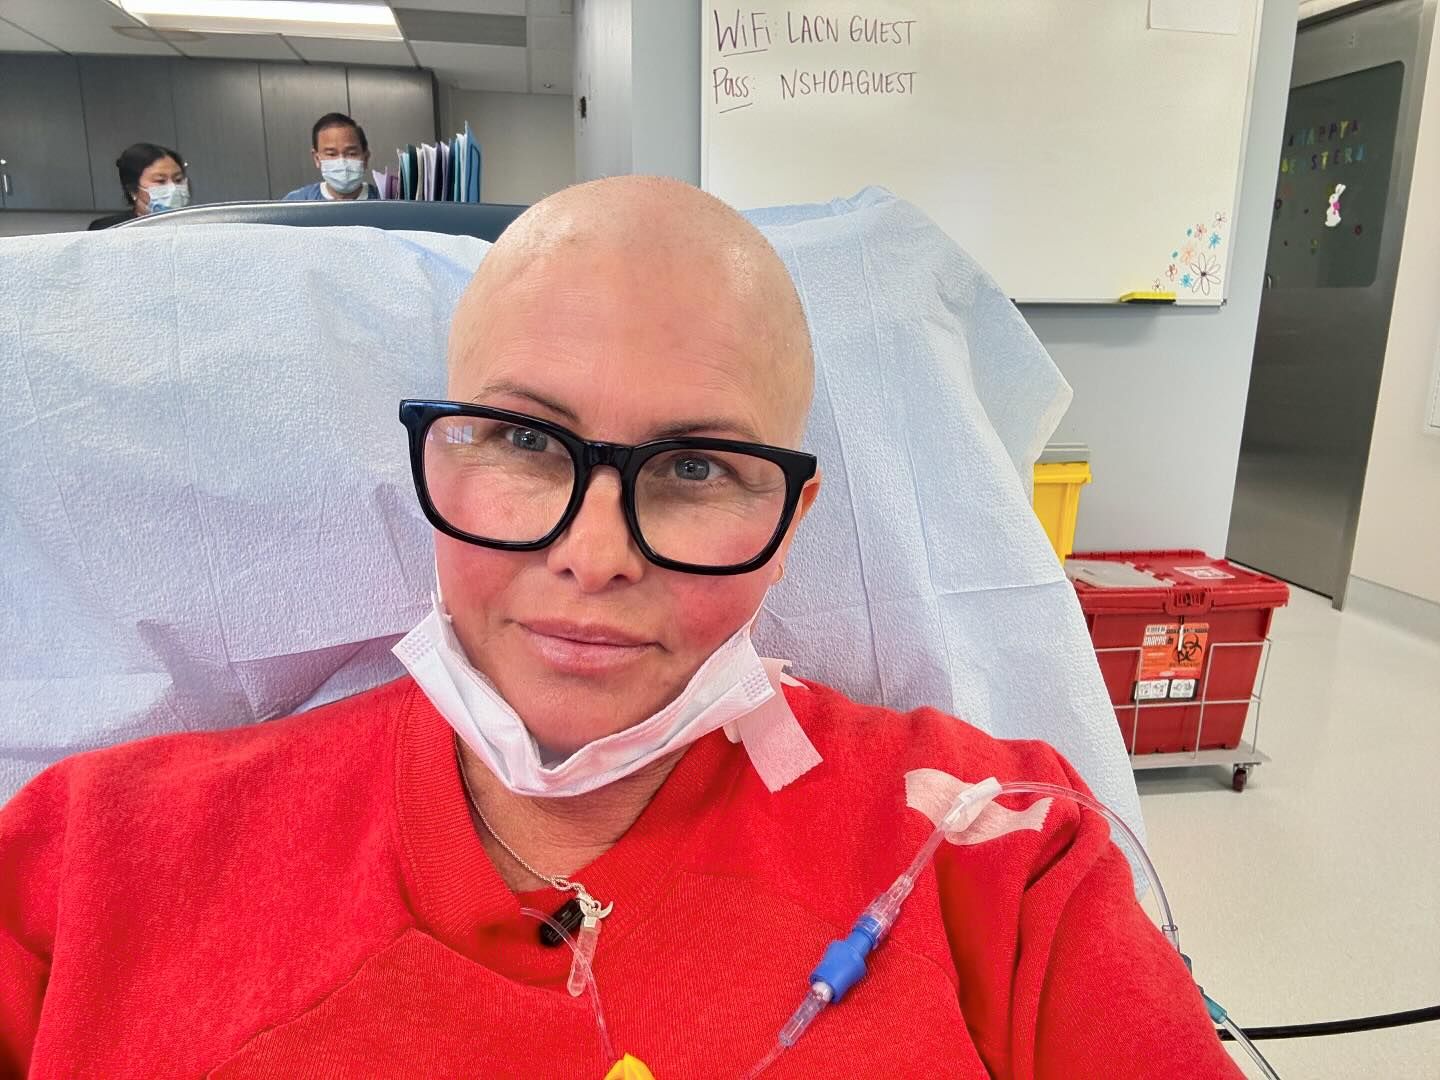 Nicole often gives fans an insight into her stage 2 cancer battle